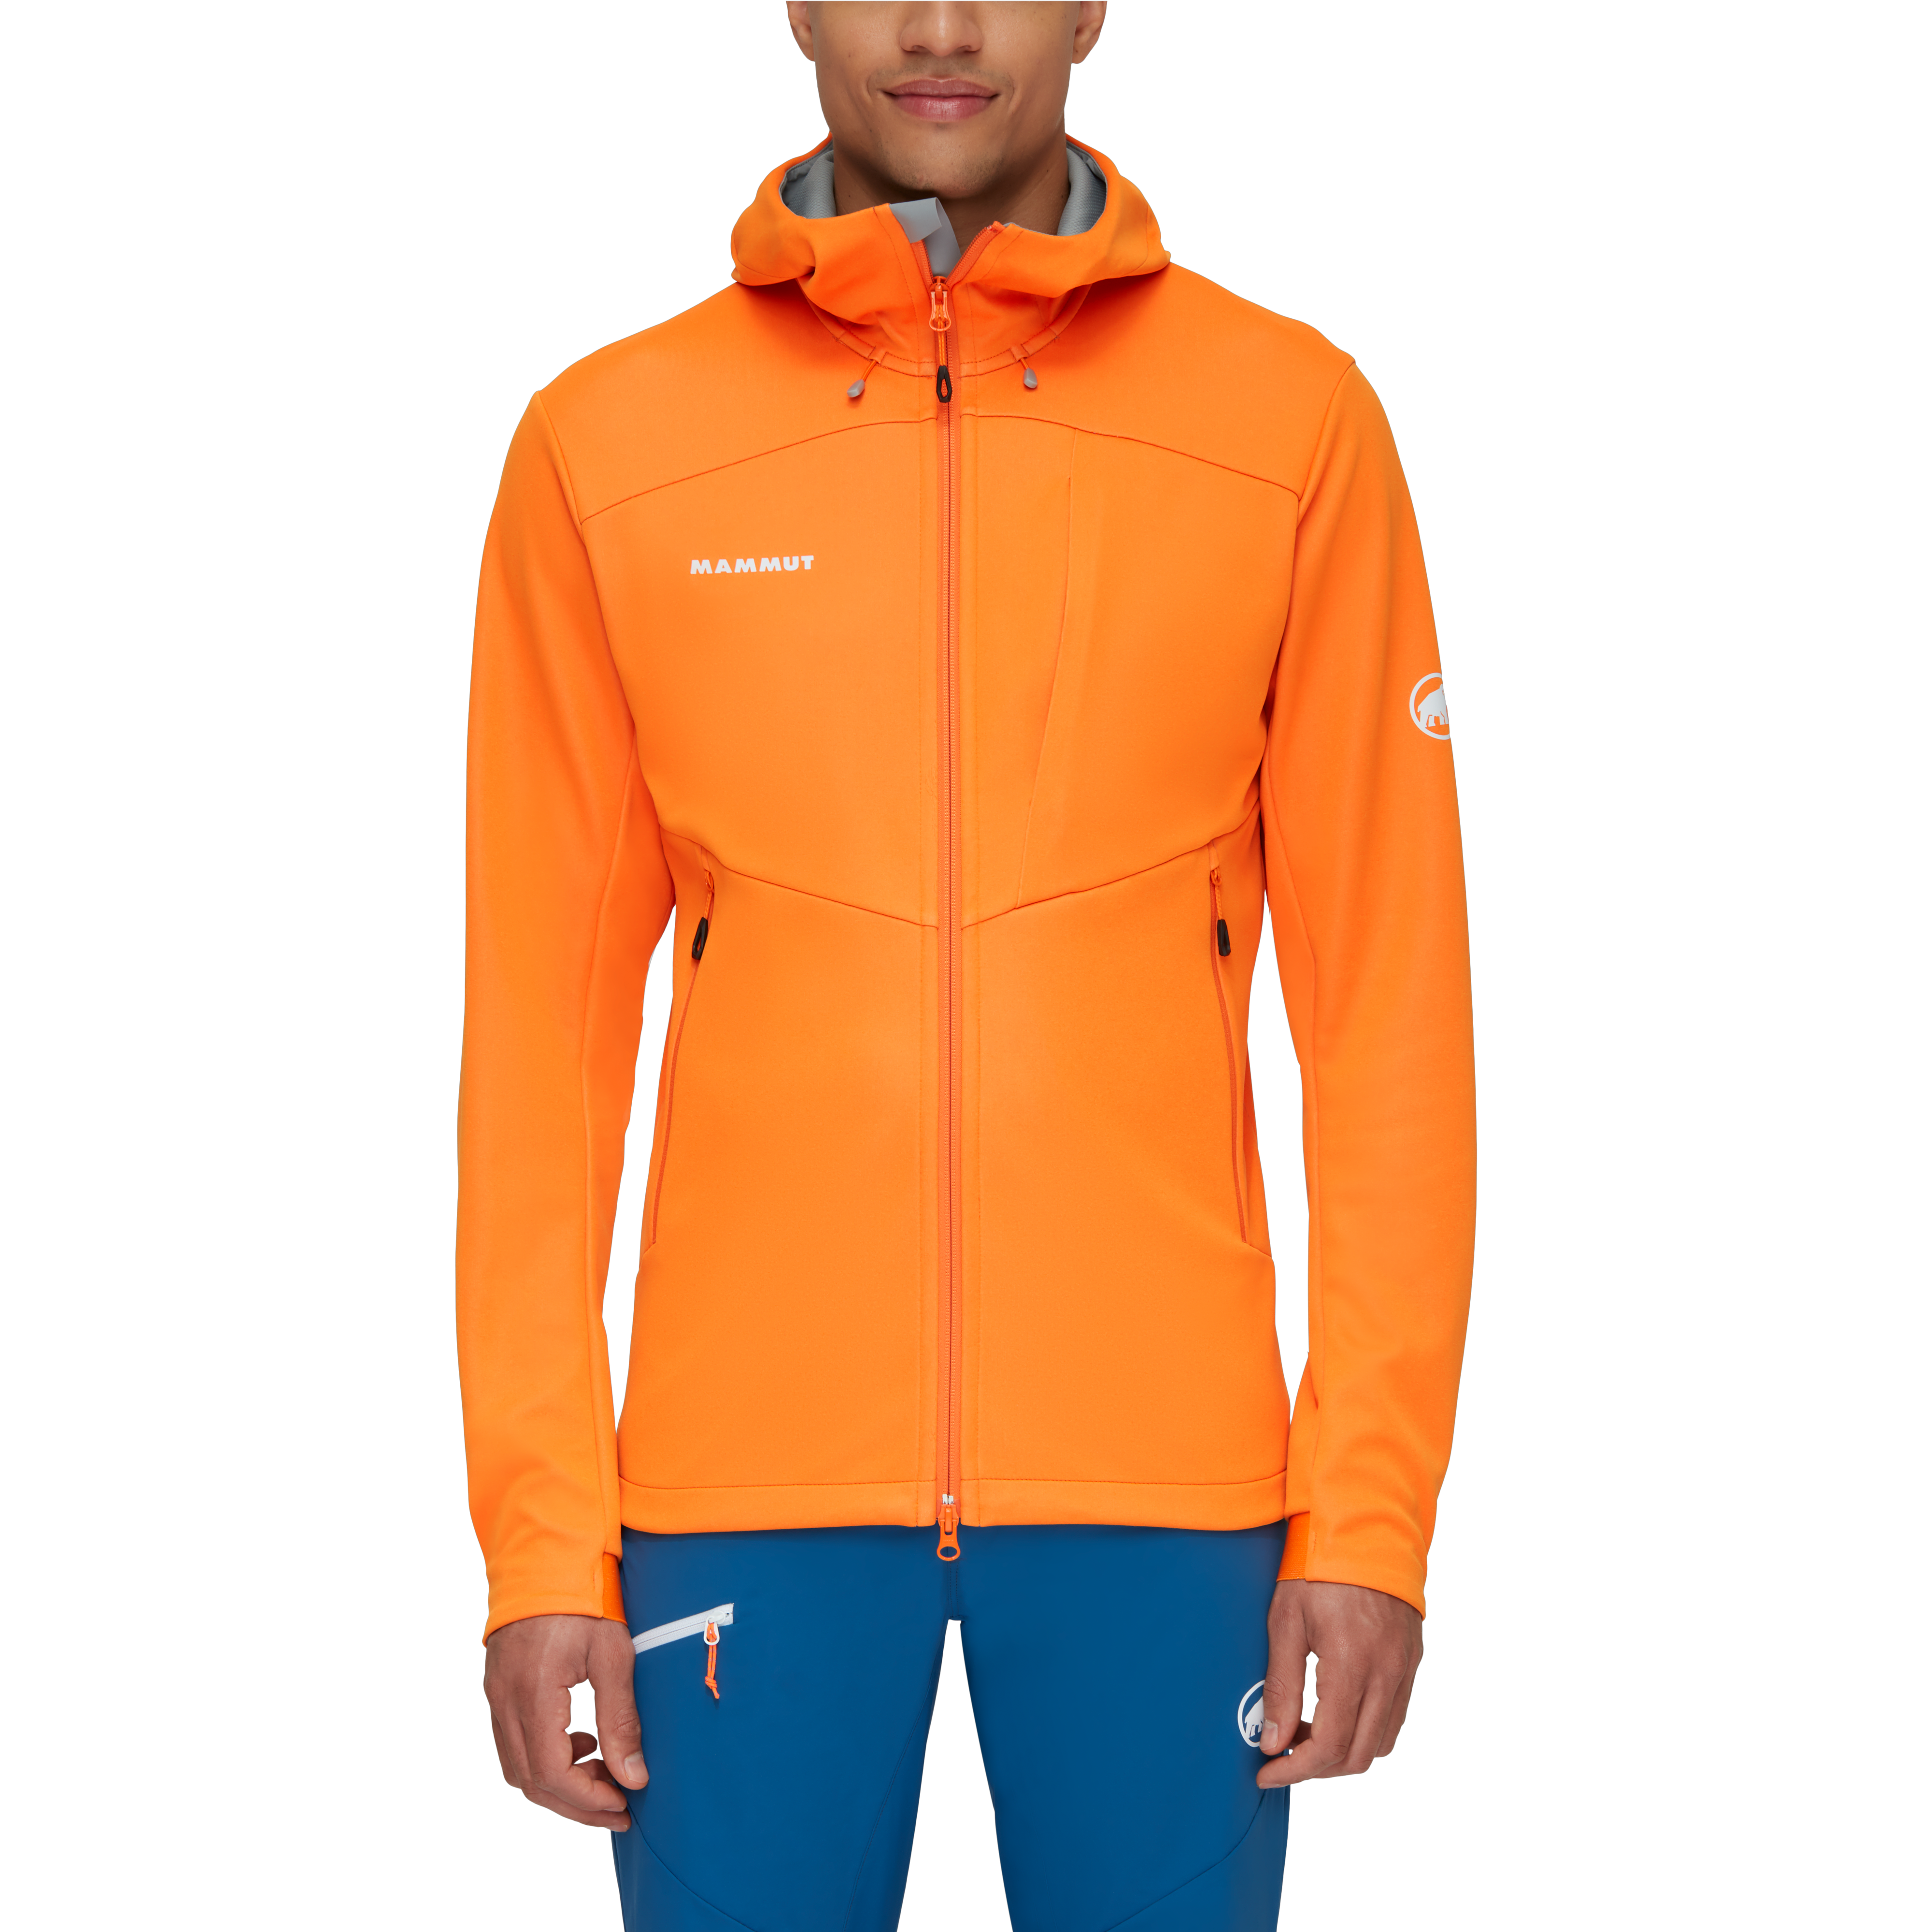 Unlock Wilderness' choice in the Mammut Vs Rab comparison, the Ultimate VII SO Hooded Jacket by Mammut